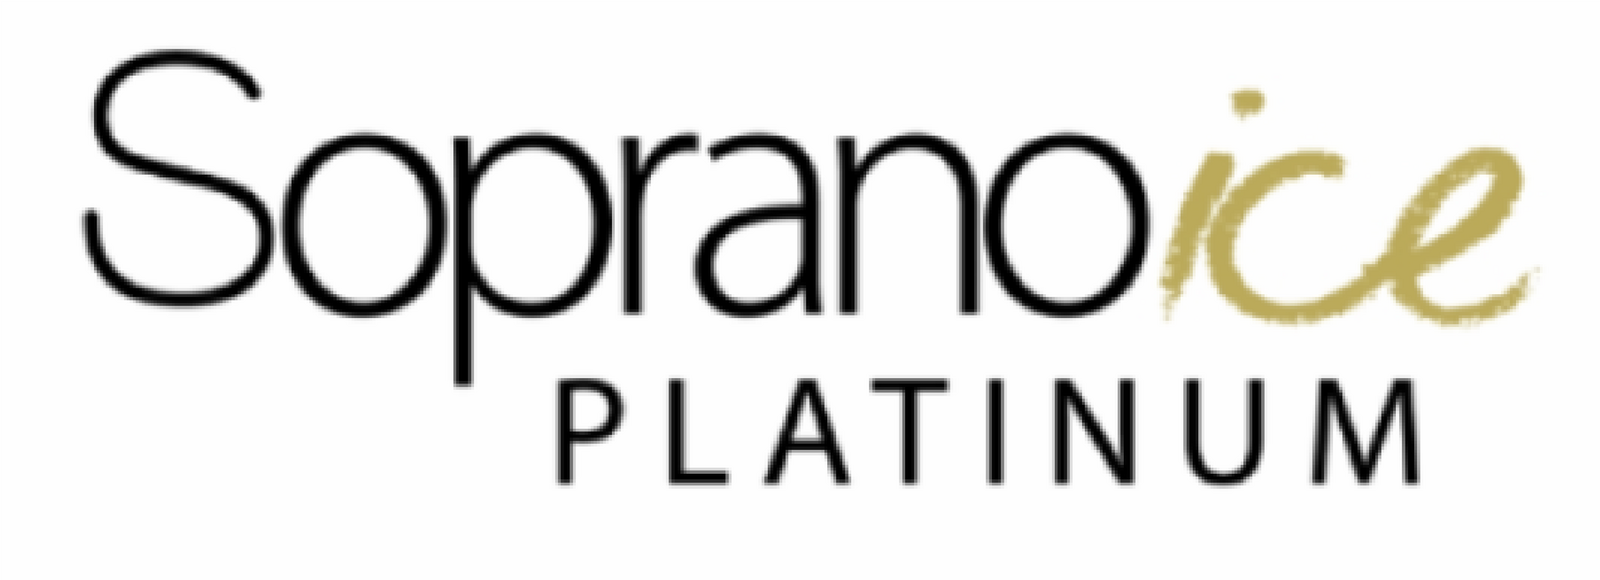 Soprano ice platinum treatments available at Missys Beauty Nantwich